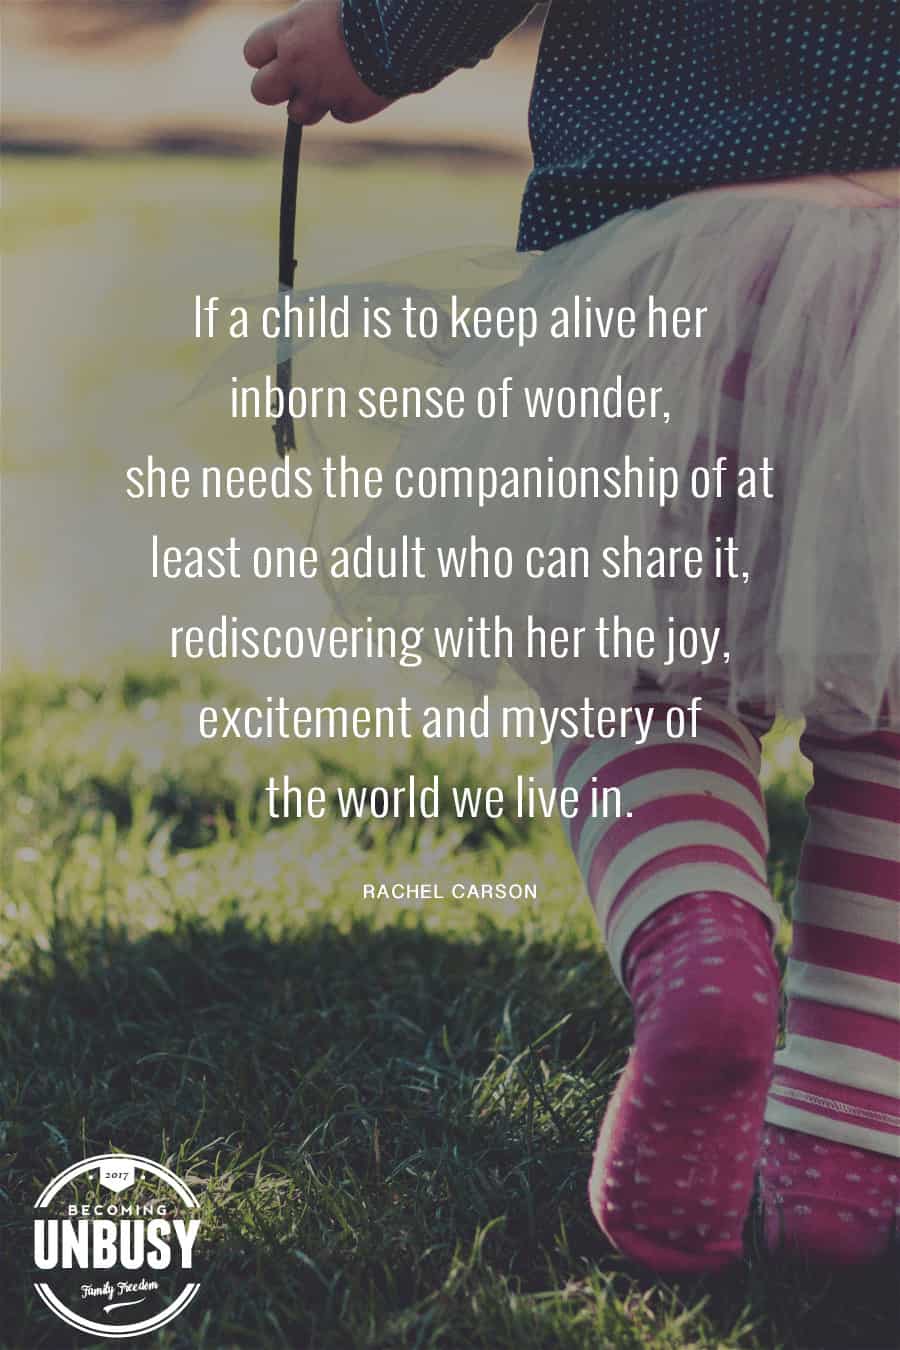 If a child is to keep alive his inborn sense of wonder, he needs the companionship of at least one adult who can share it, rediscovering with him the joy, excitement, and mystery of the world we live in. #quote #rachelcarson #becomingunbusy #takebackchildhood #optoutside #gooutside #quote *love this post and quote